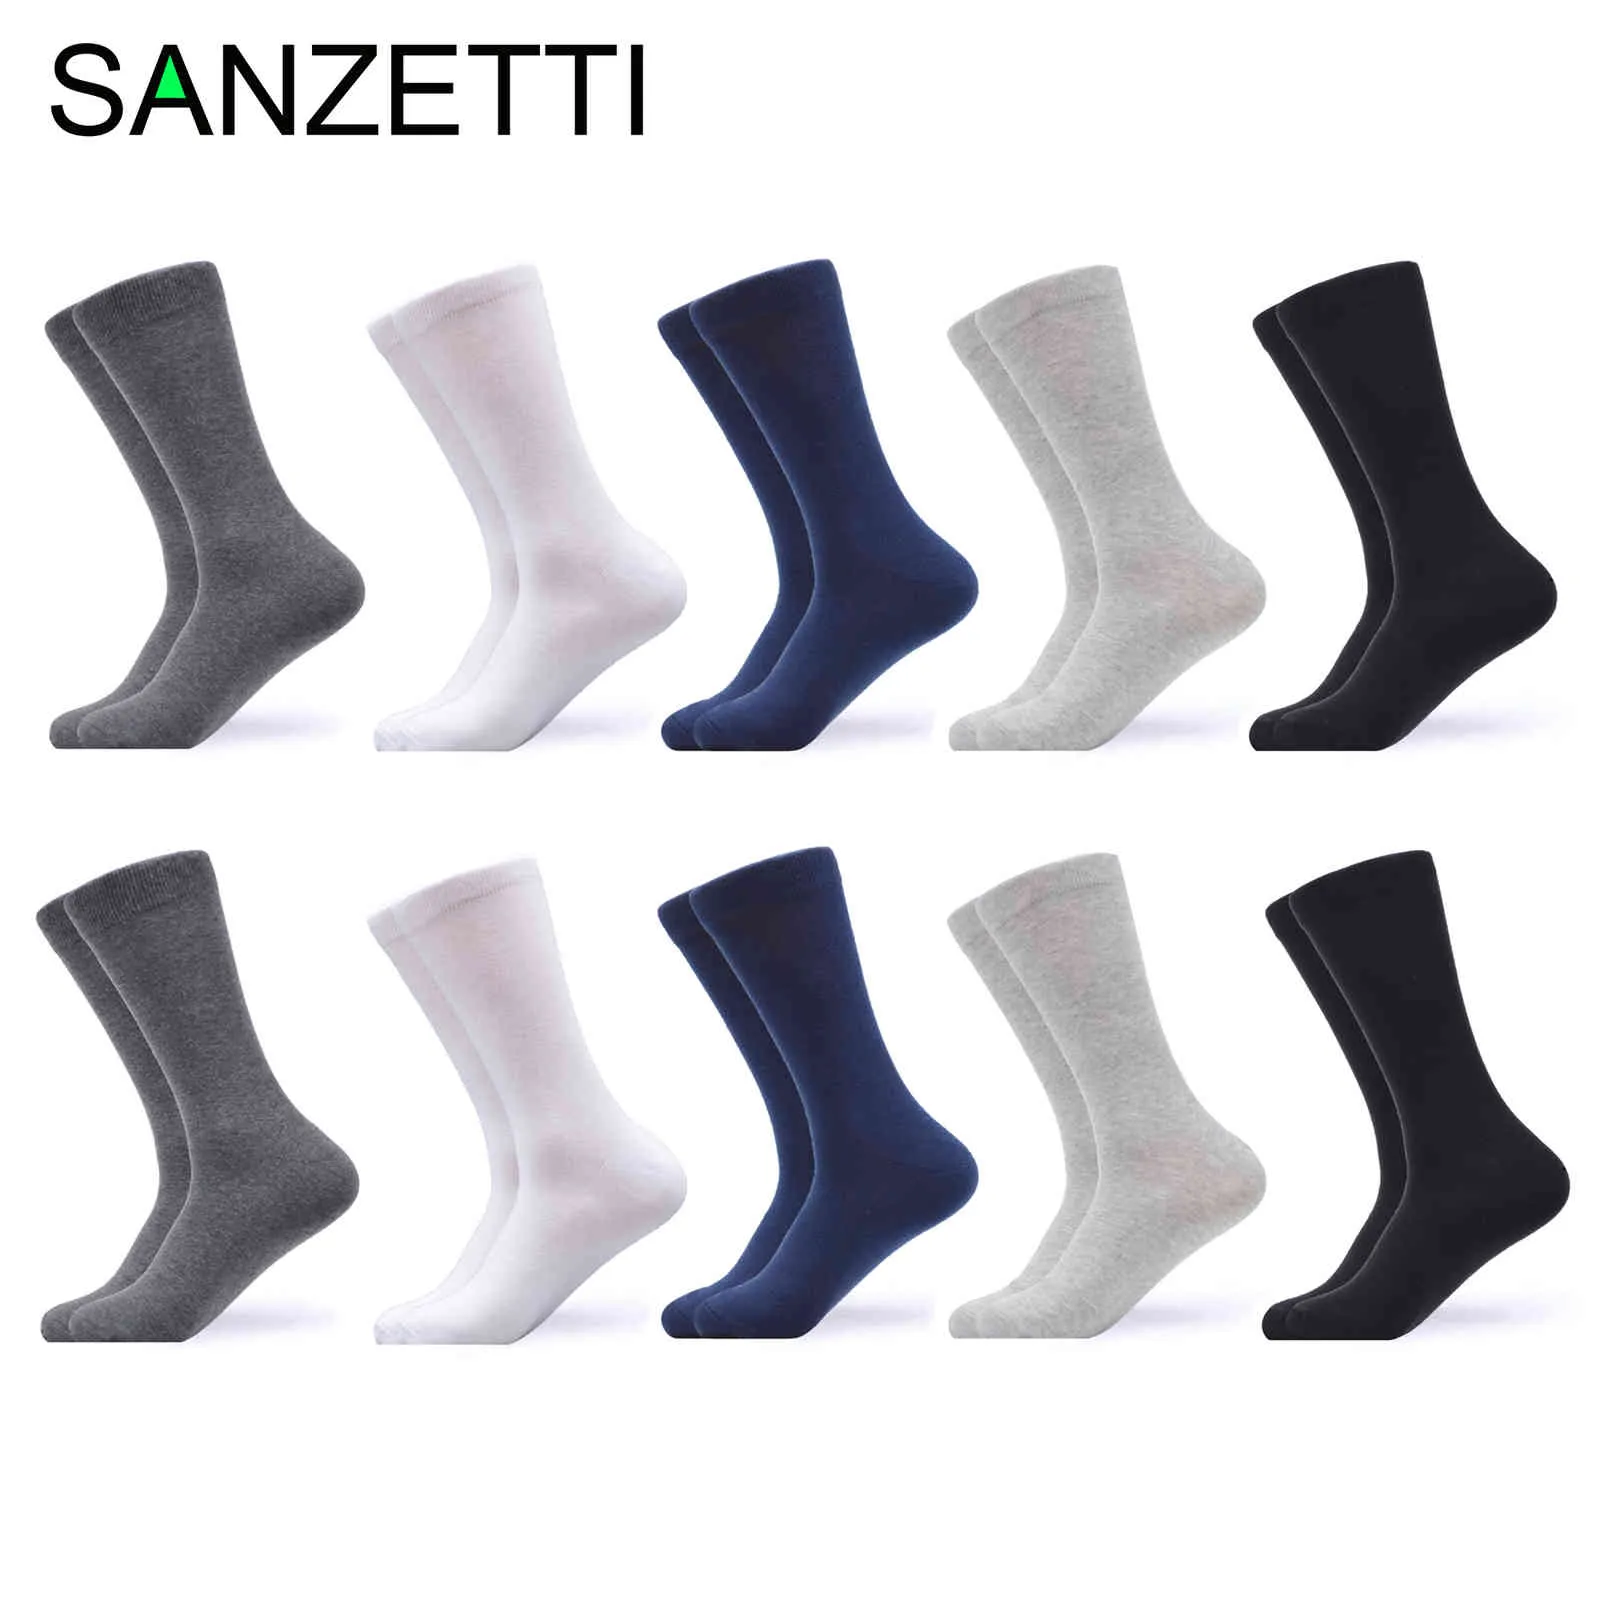 SANZETTI Brand Men's Casual Combed Classic Business Solid Socks Party Wedding Gift Comfortable Dress Black Long Sock